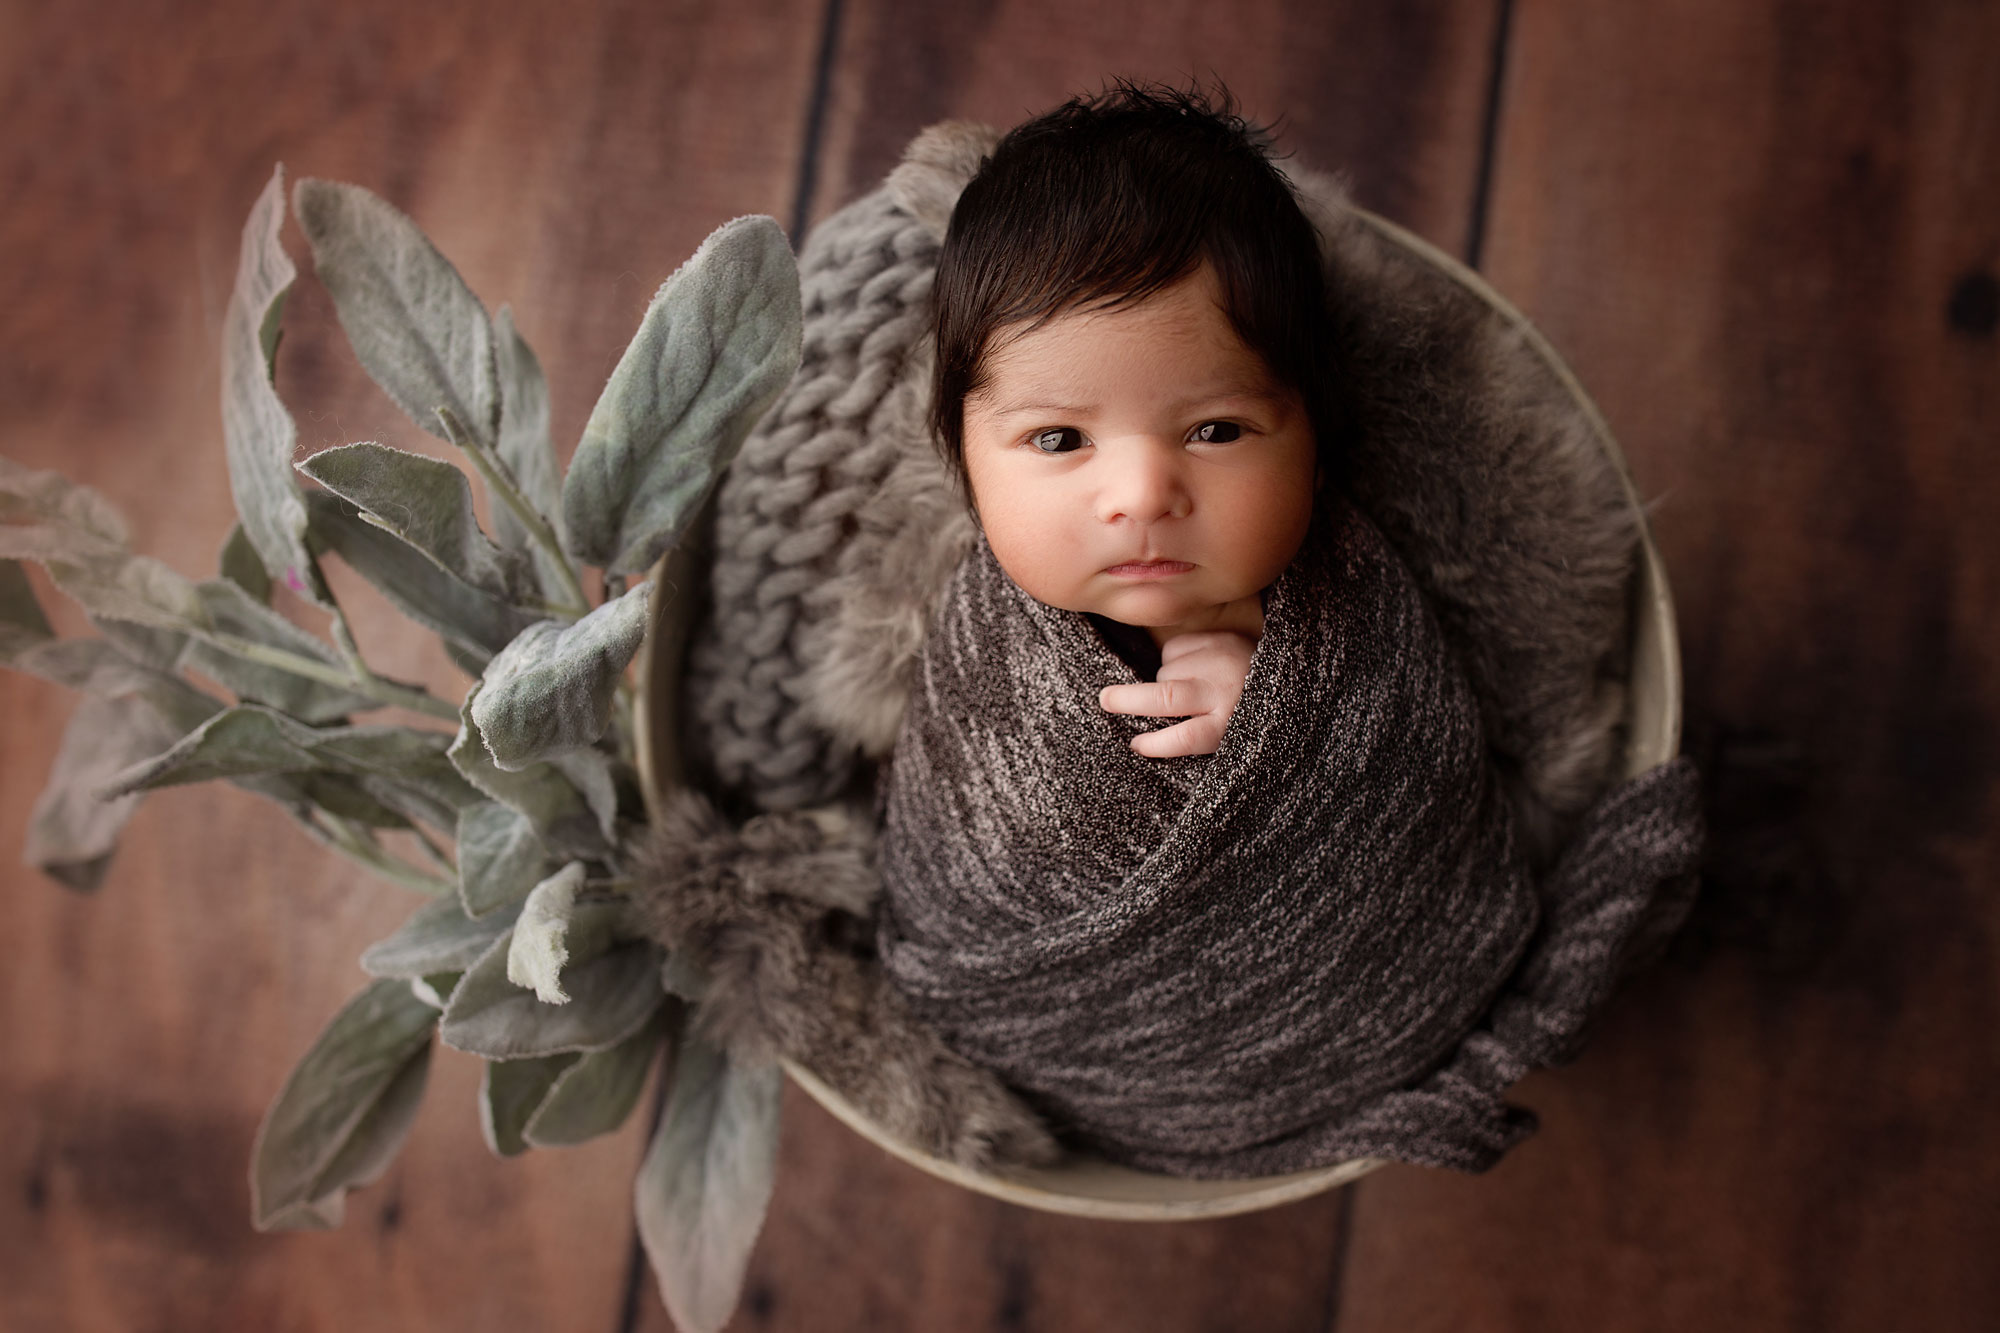 new jersey newborn photographer, baby in gray swaddle sleeping in bucket with decorative leaves